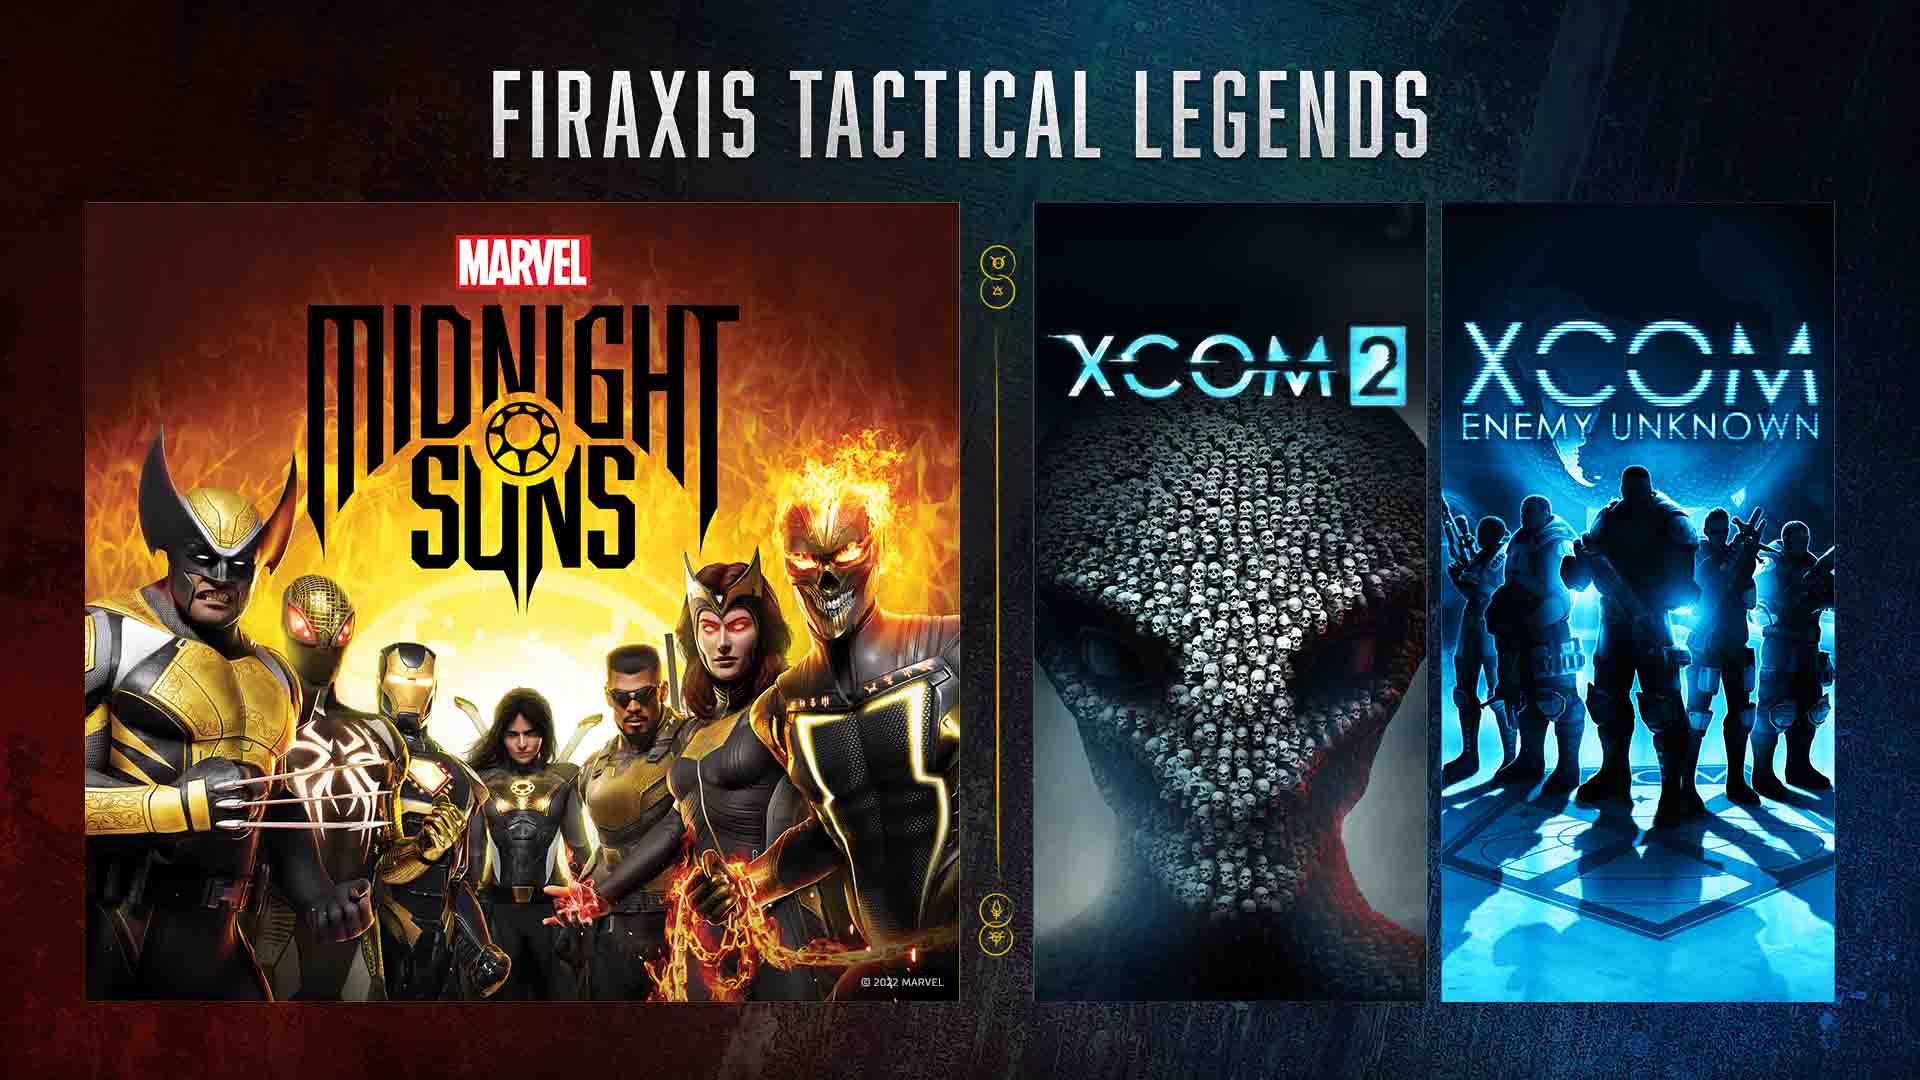 Marvel's Midnight Suns is part of a time limited Firaxis Steam offer